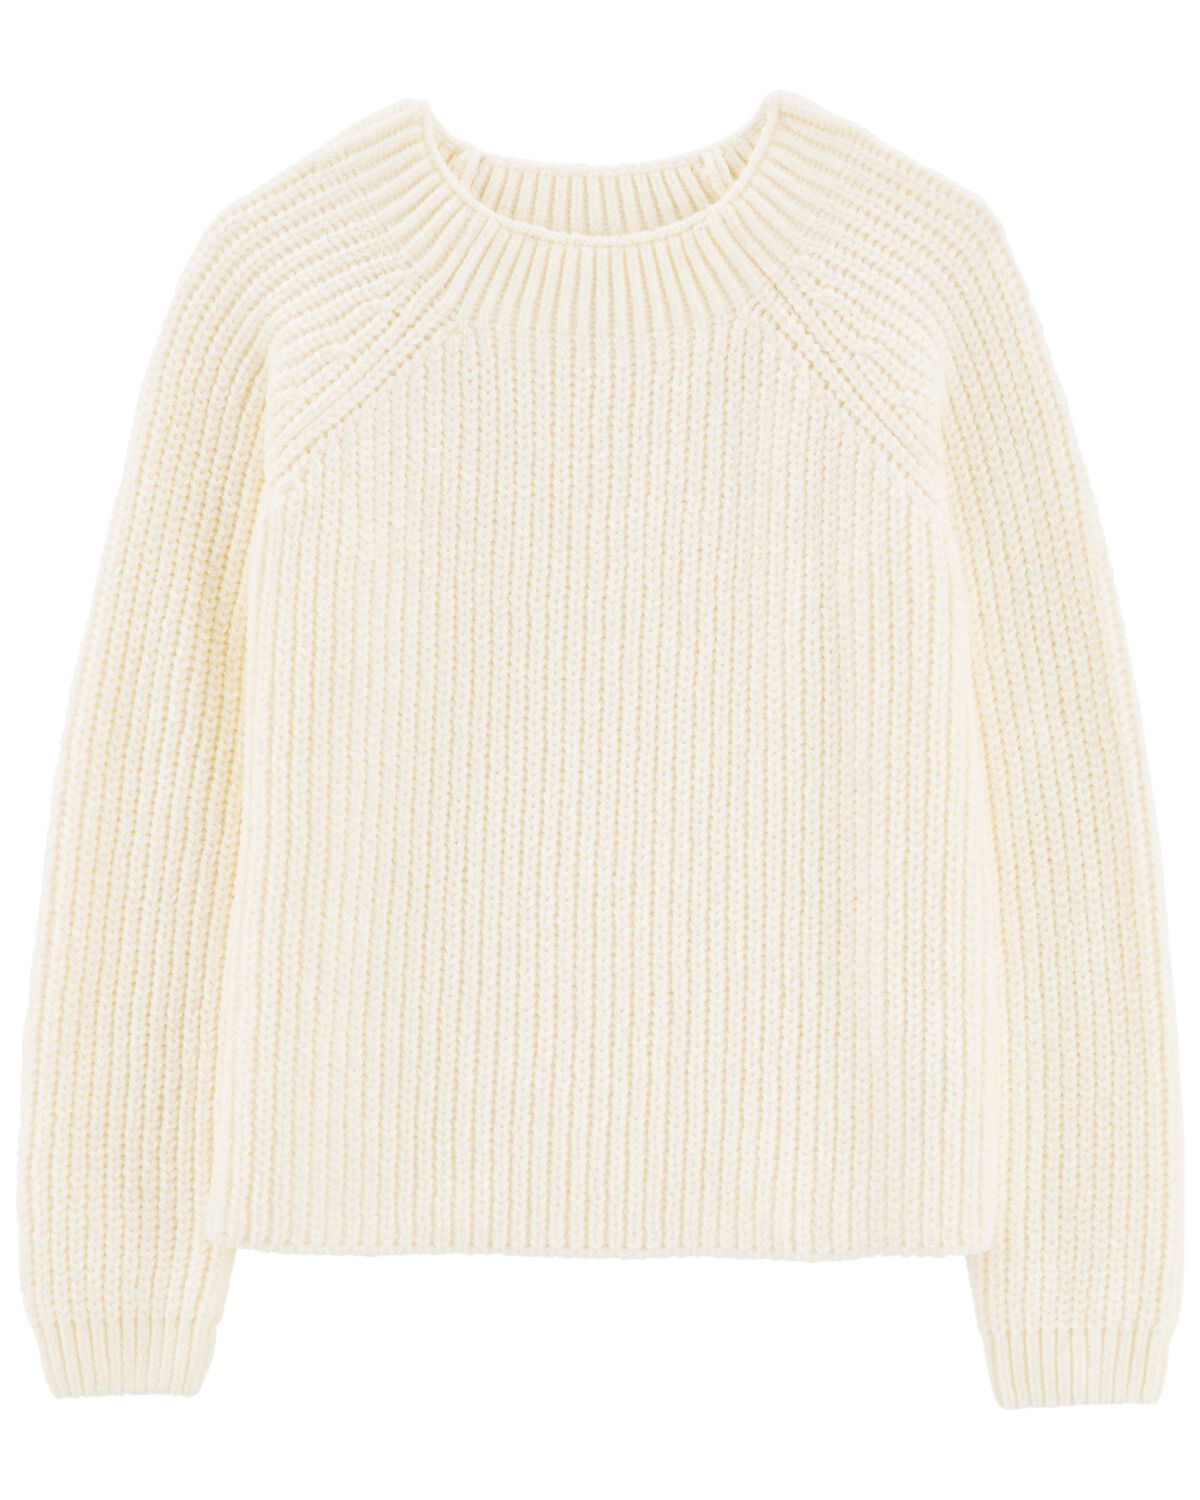 White Kid Soft Chenille Sweater | carters.com